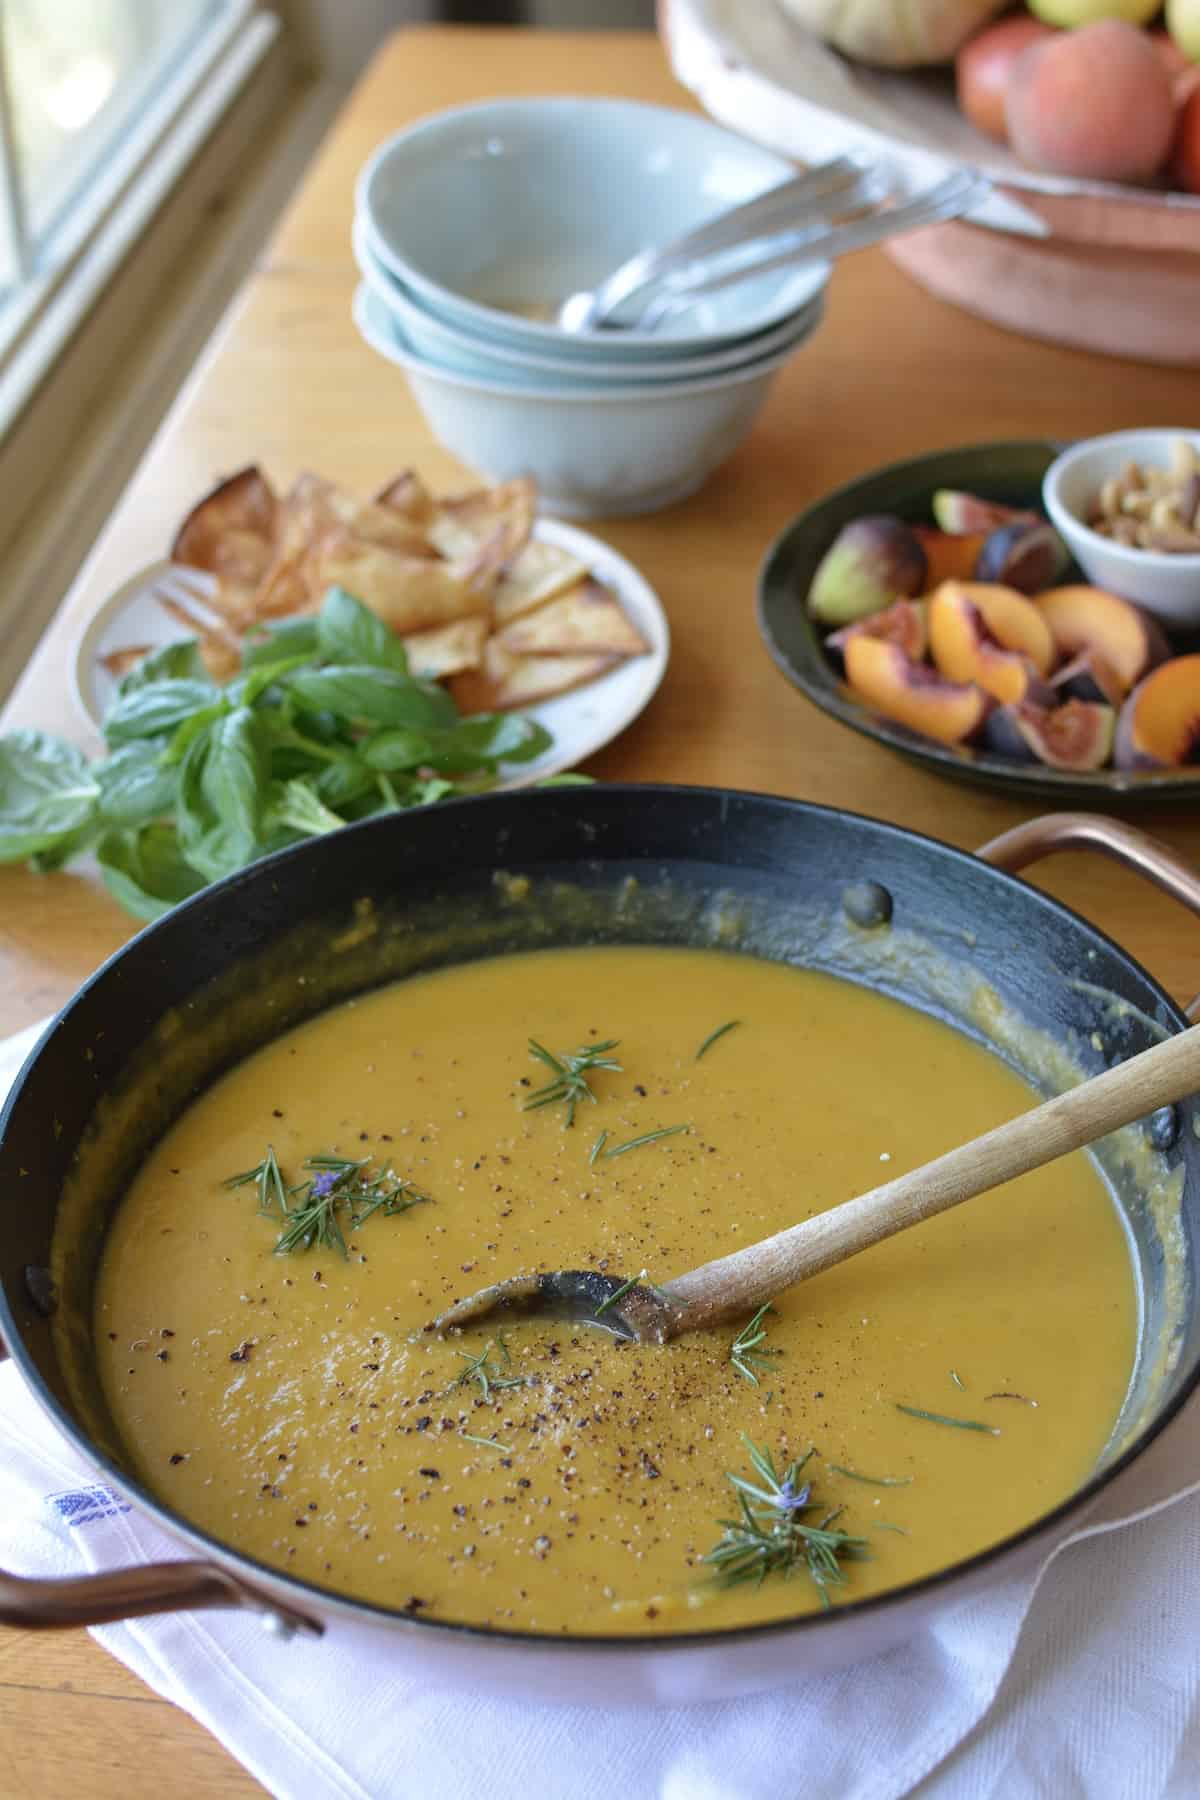 Homemade Roasted Squash Soup with just 10 ingredients! This soup recipe is healthy and has a deliciously creamy flavor with coconut milk, ground coriander, and guajillo chili powder. A super easy vegan and naturally gluten-free comfort food recipe! #roastedsquashsoup #butternutsquashsoup #vegansoup #easysoup